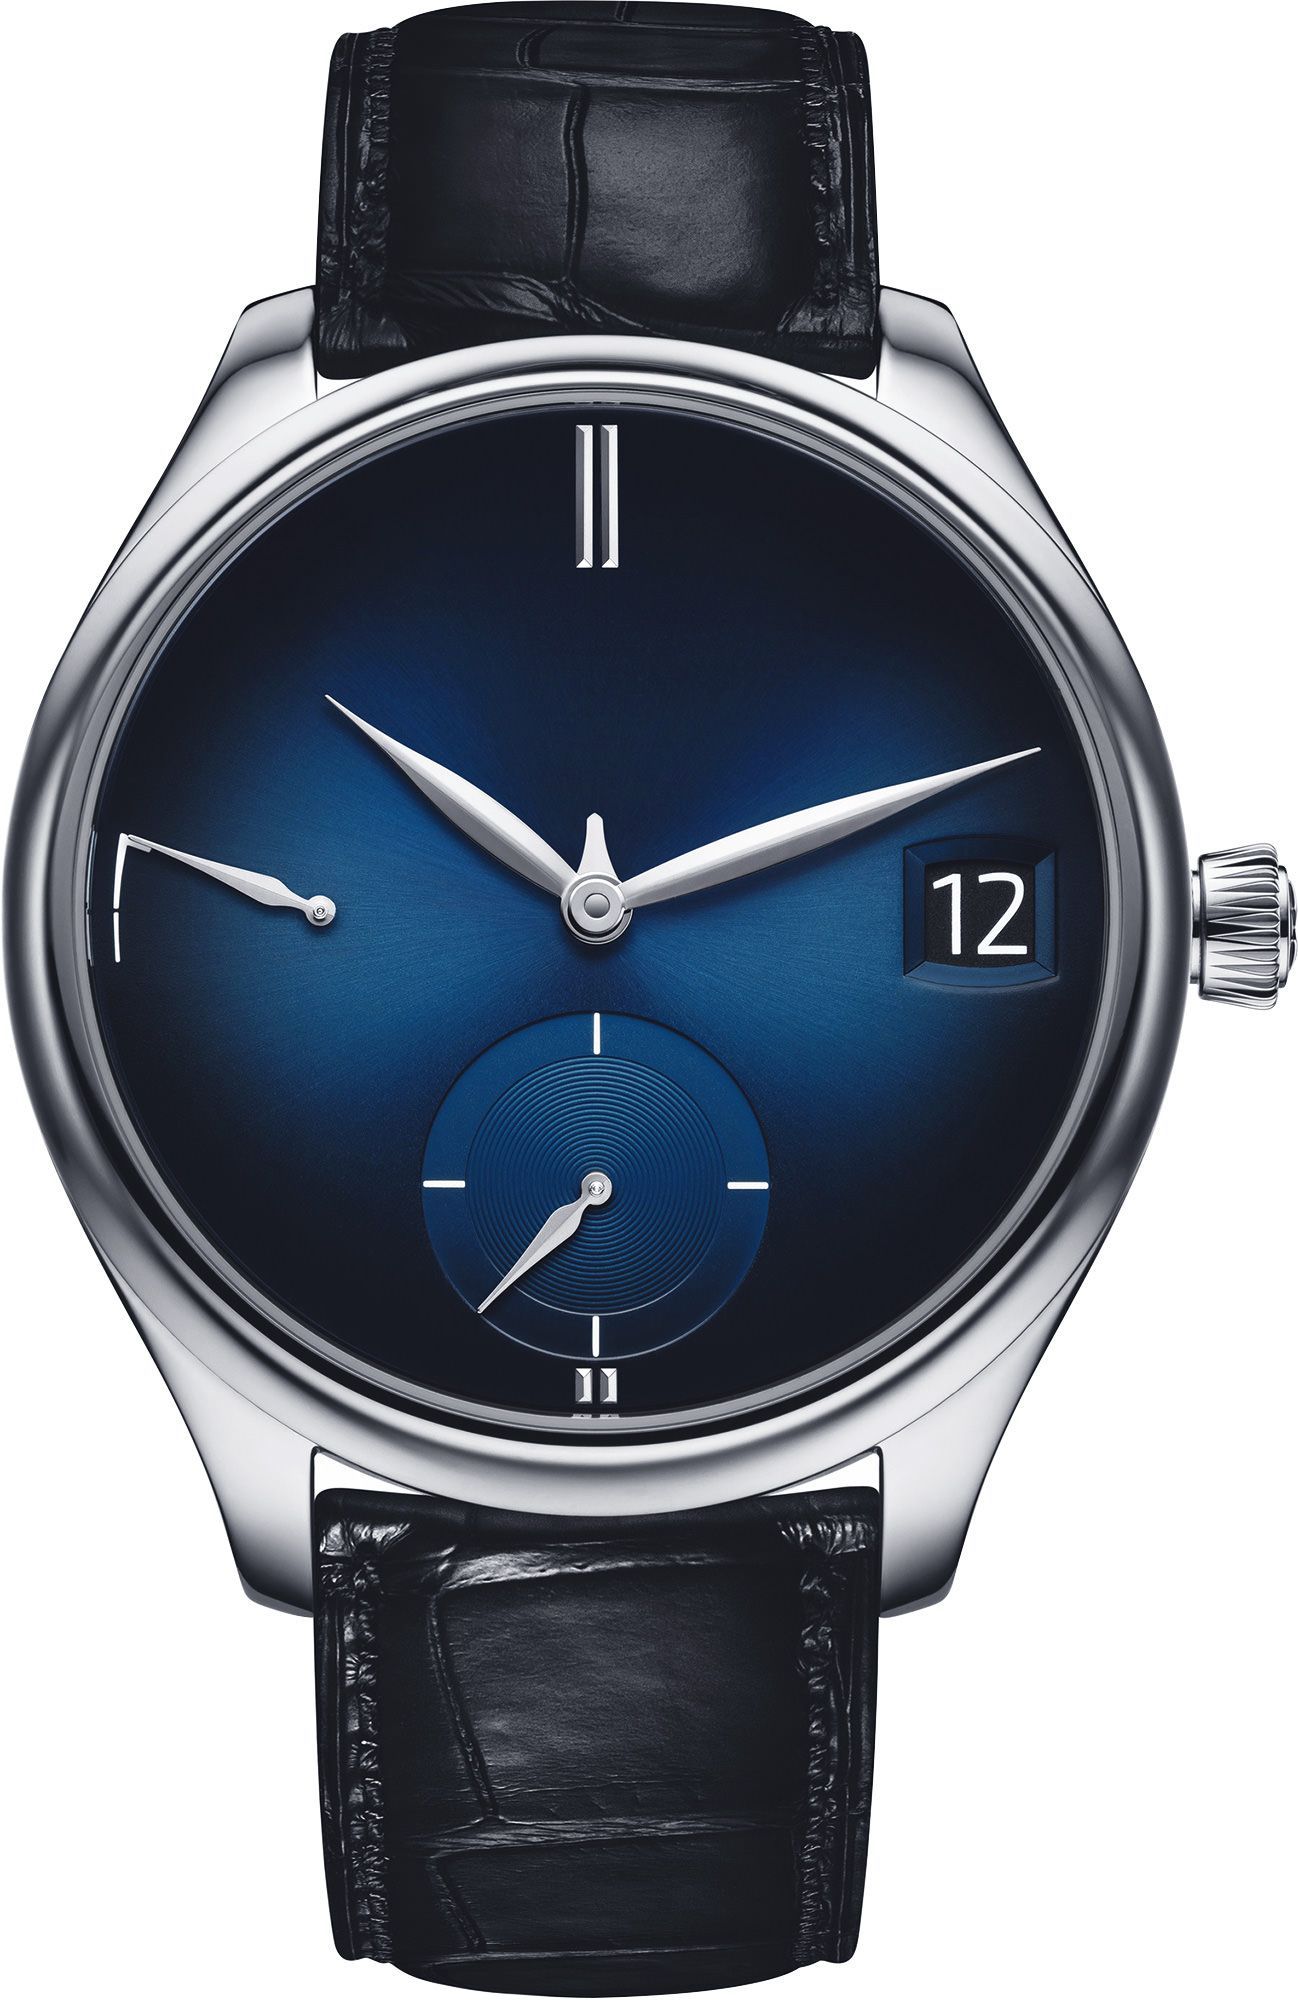 H. Moser & Cie. Endeavour Perpetual Calendar Blue Dial 42 mm Manual Winding Watch For Men - 1